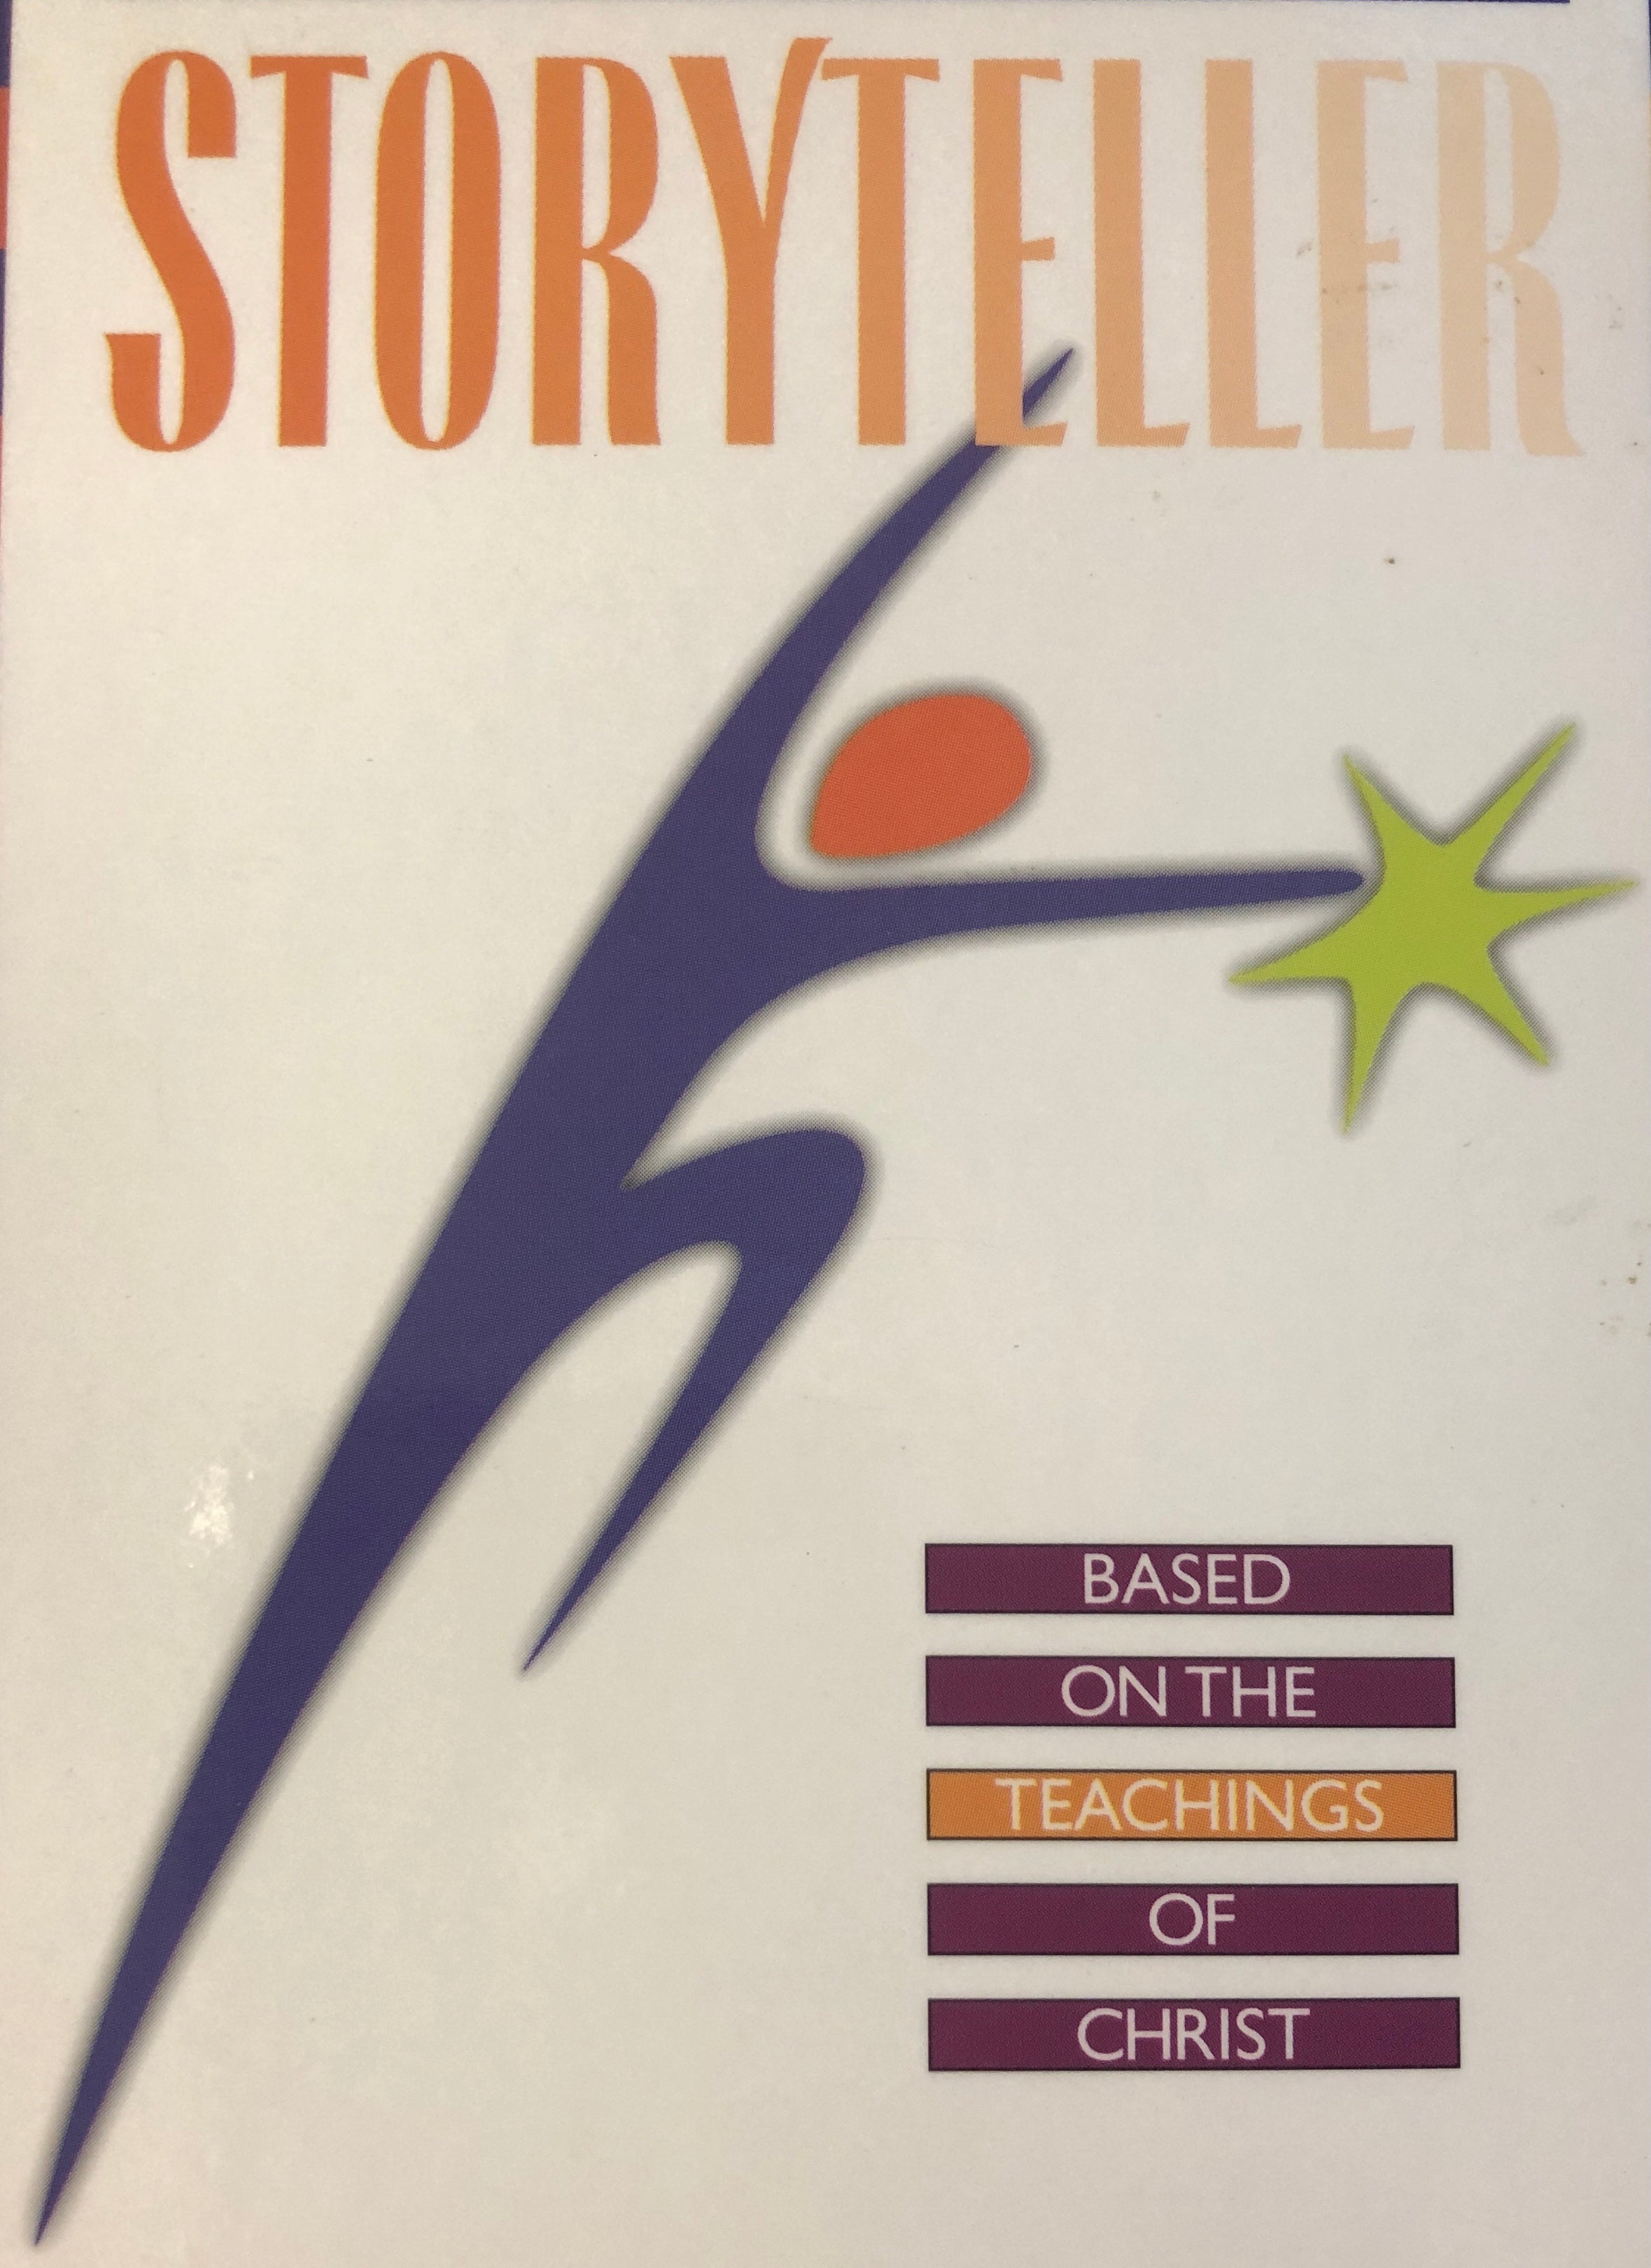 Storyteller, a redemptive musical experience